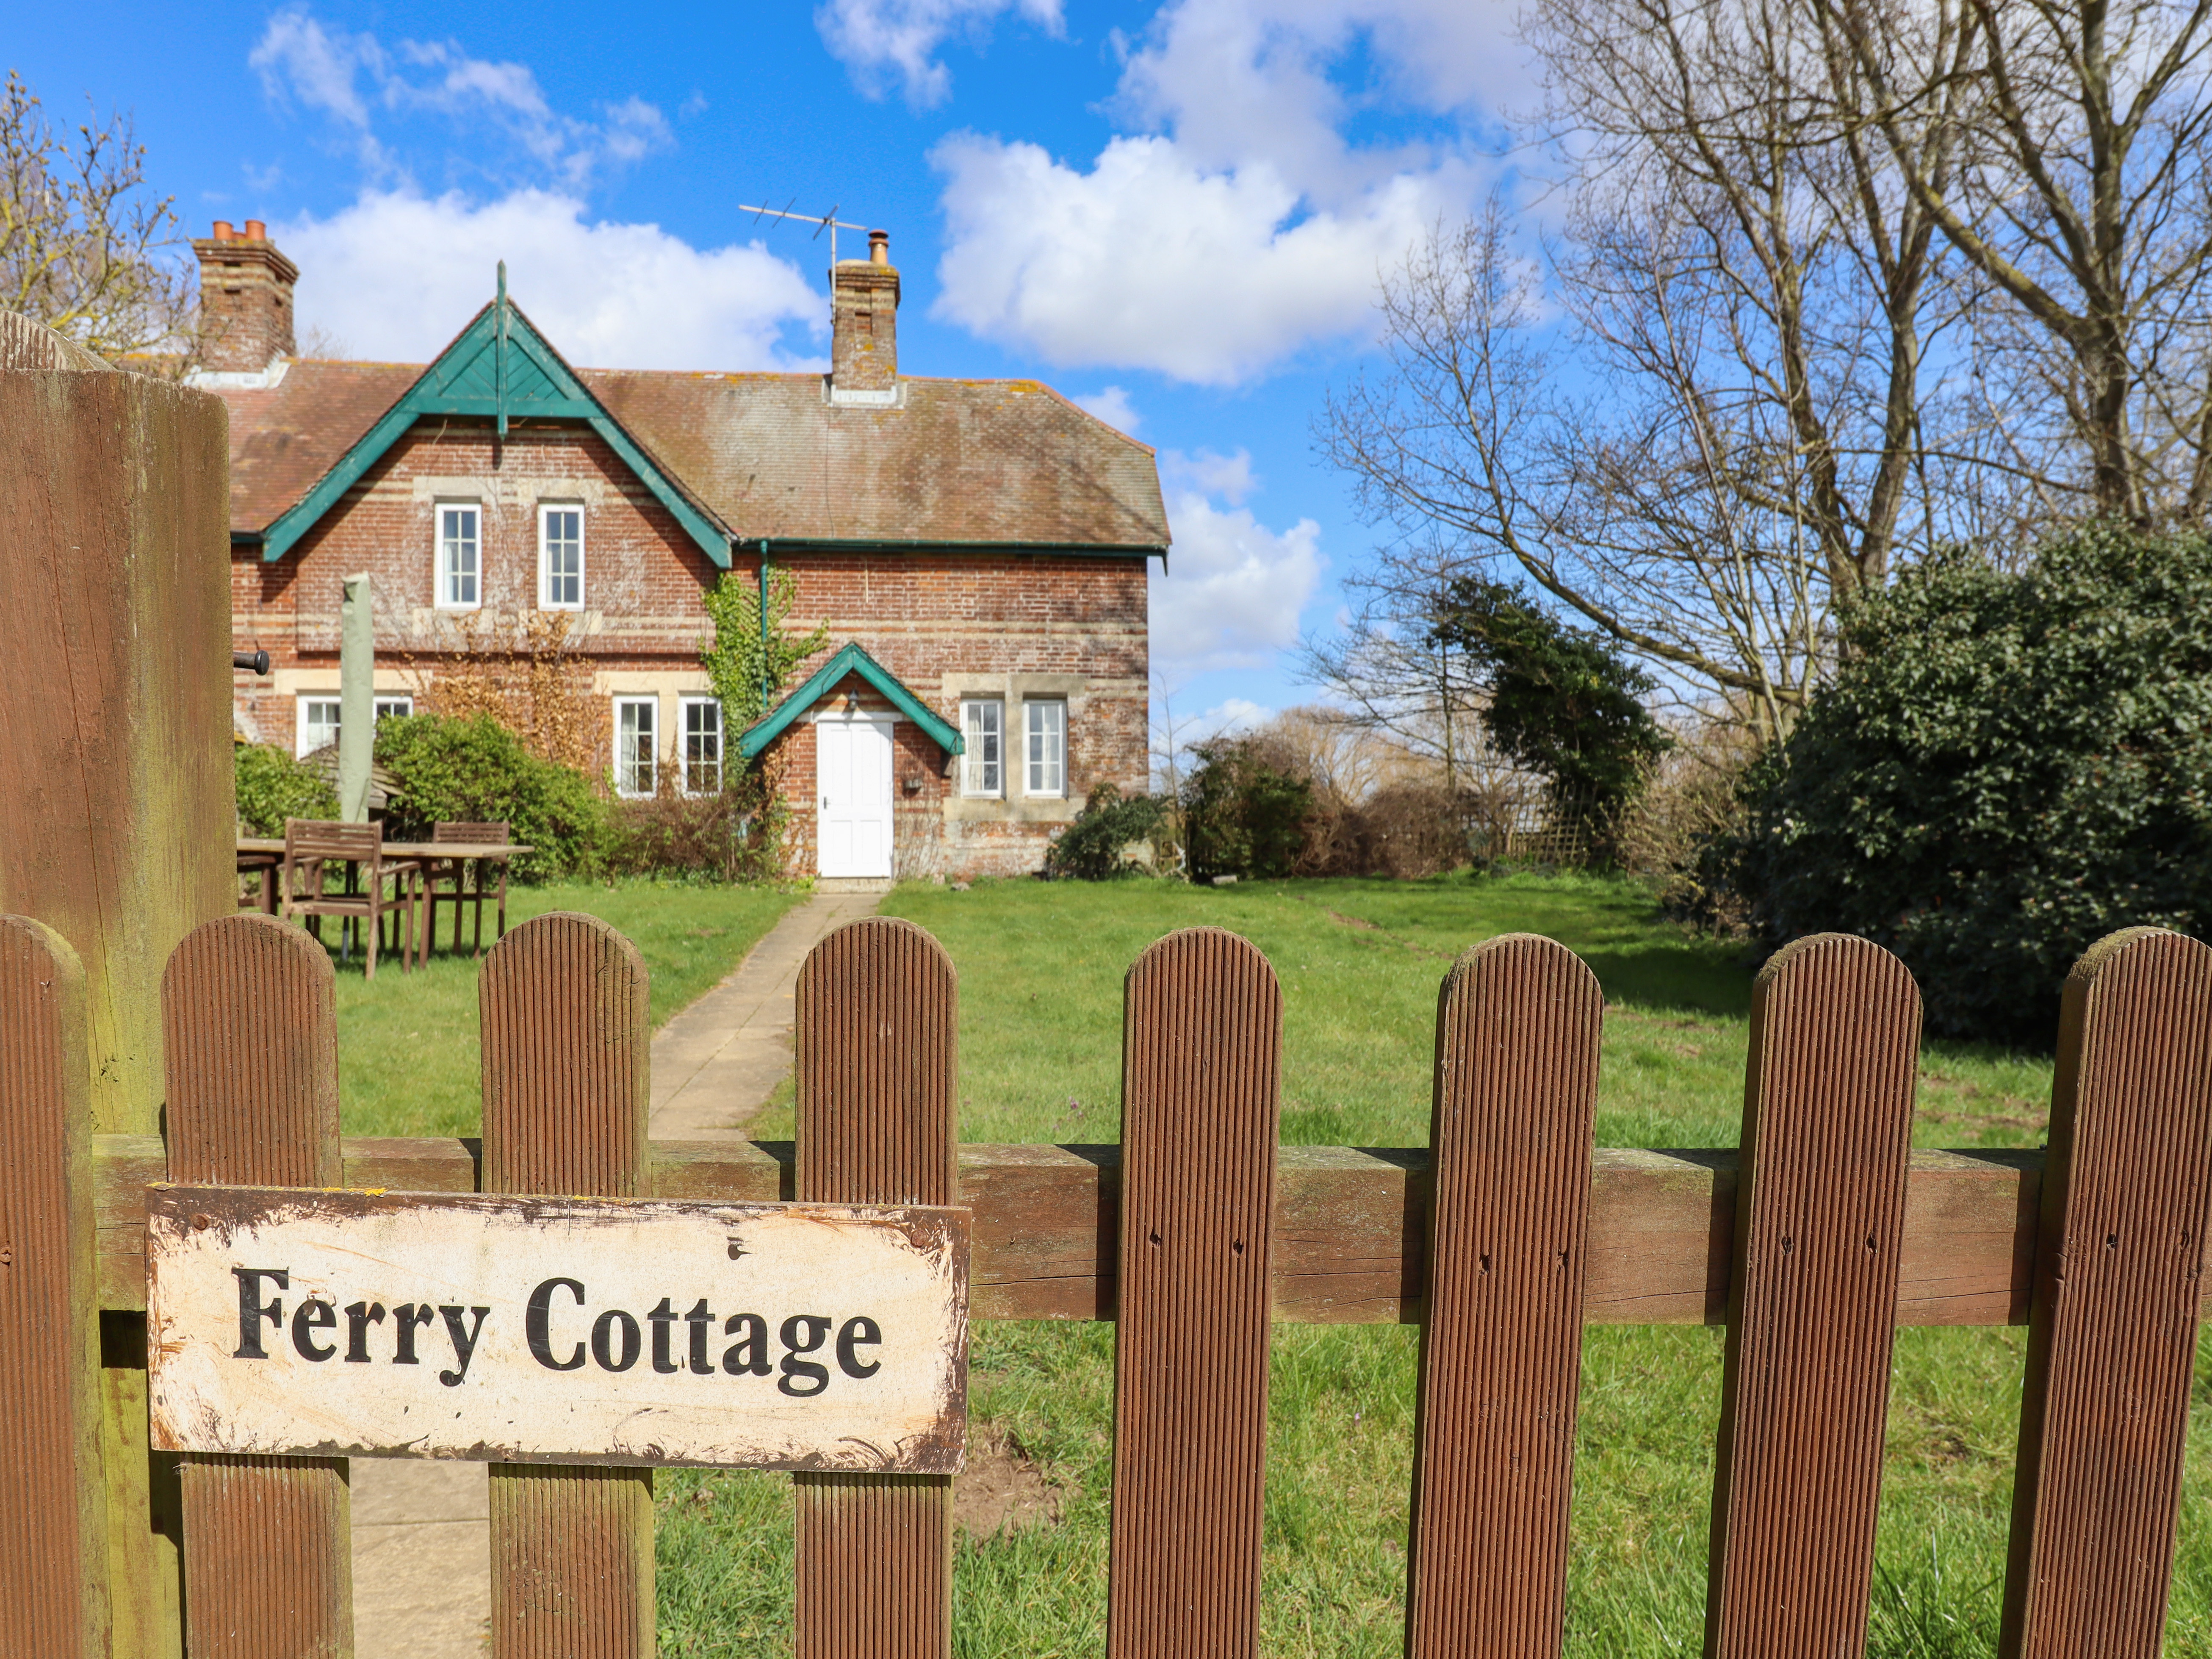 Ferry Cottage, Orford